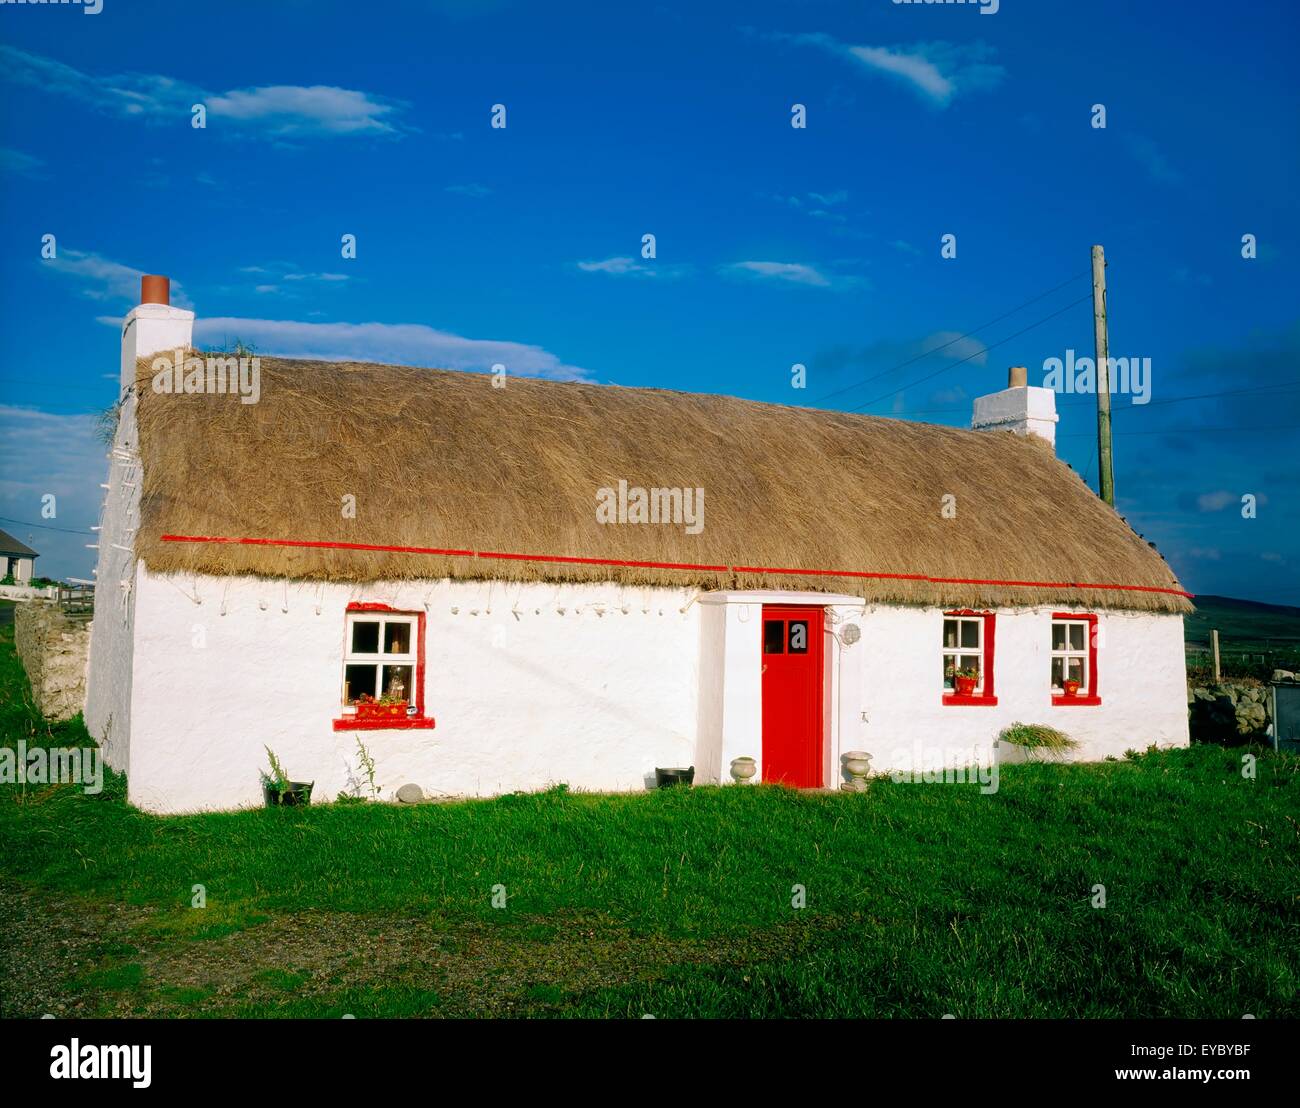 Thatched Cottage Malin Head Inishowen Peninsula Co Donegal